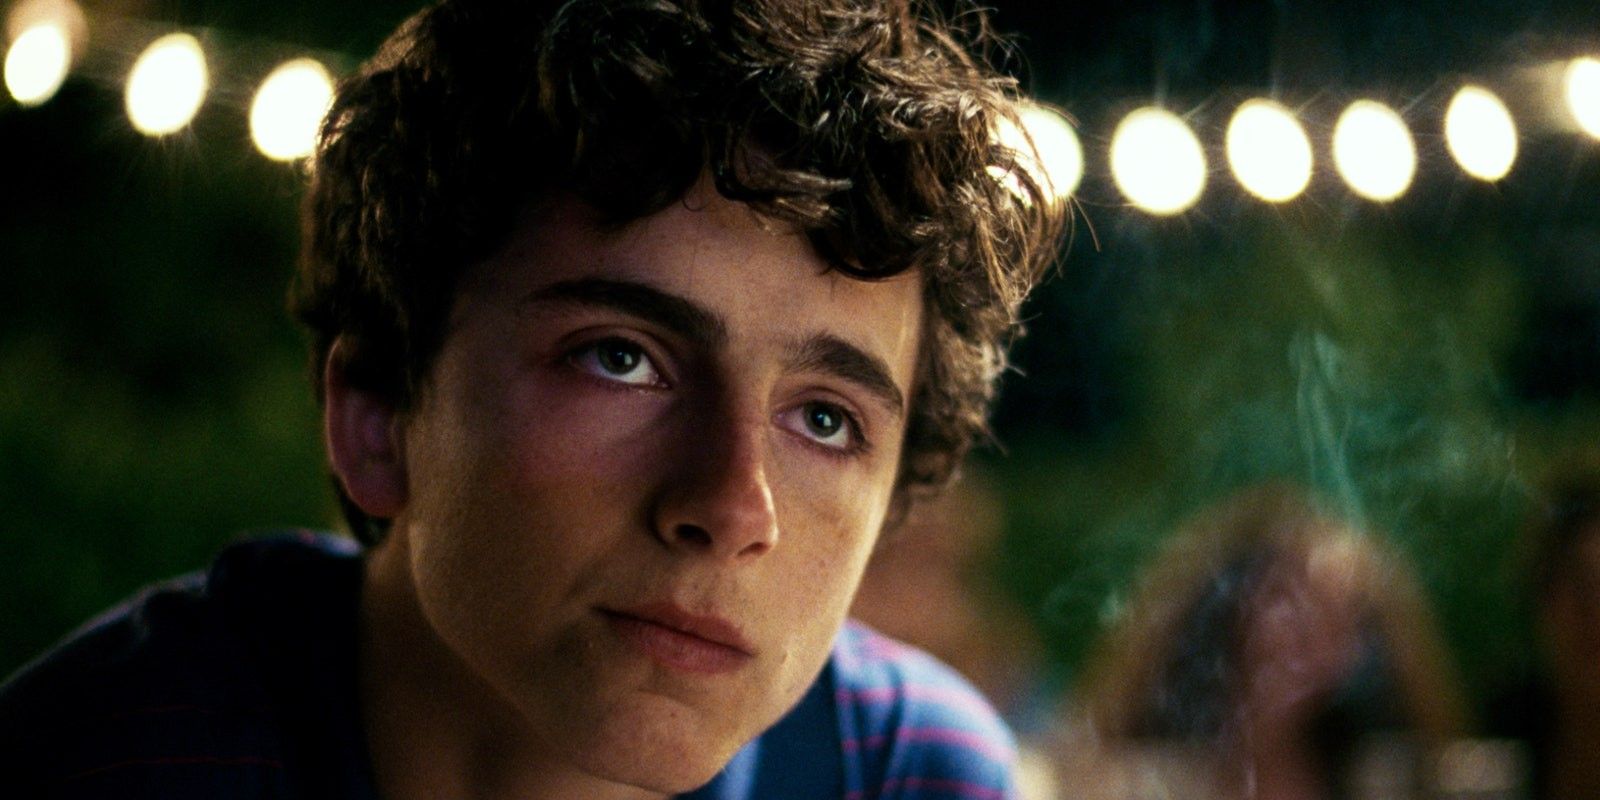 Timothee Chalamet in Call Me by Your Name